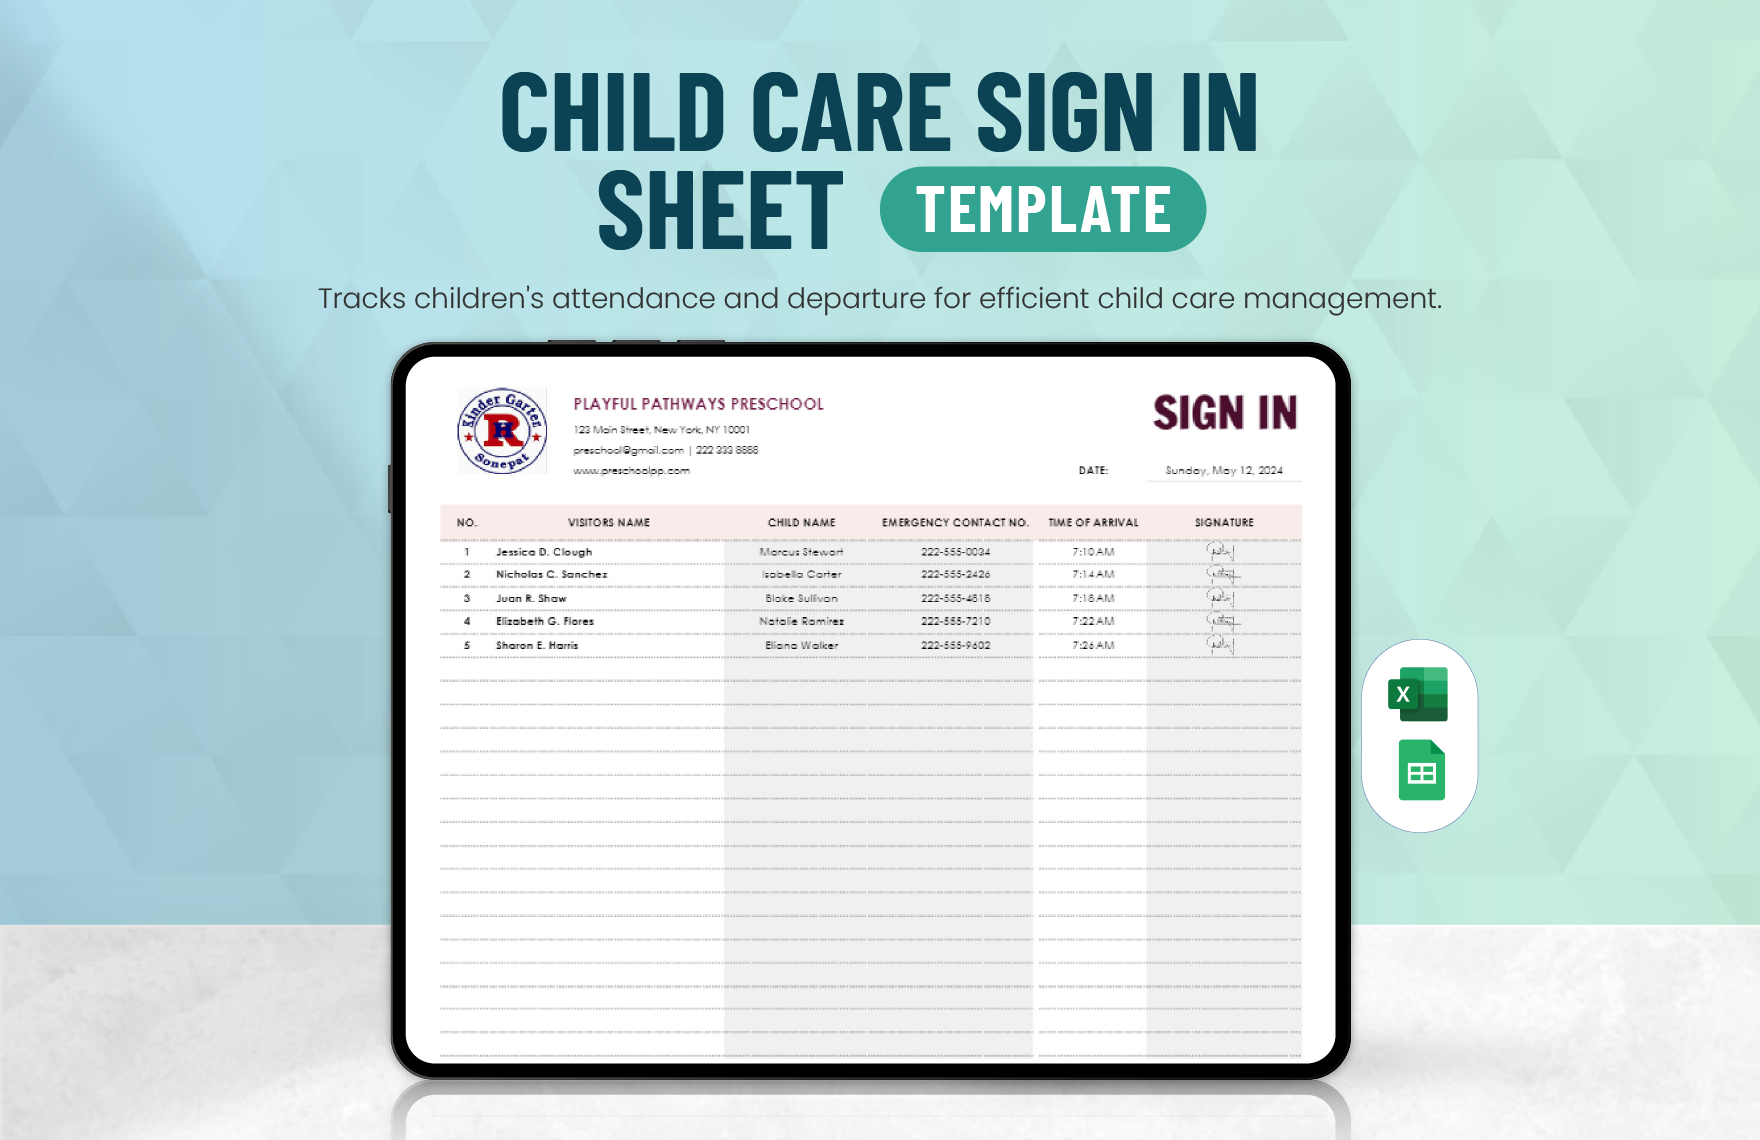 Child Care Sign in Sheet Template in Excel, Google Sheets